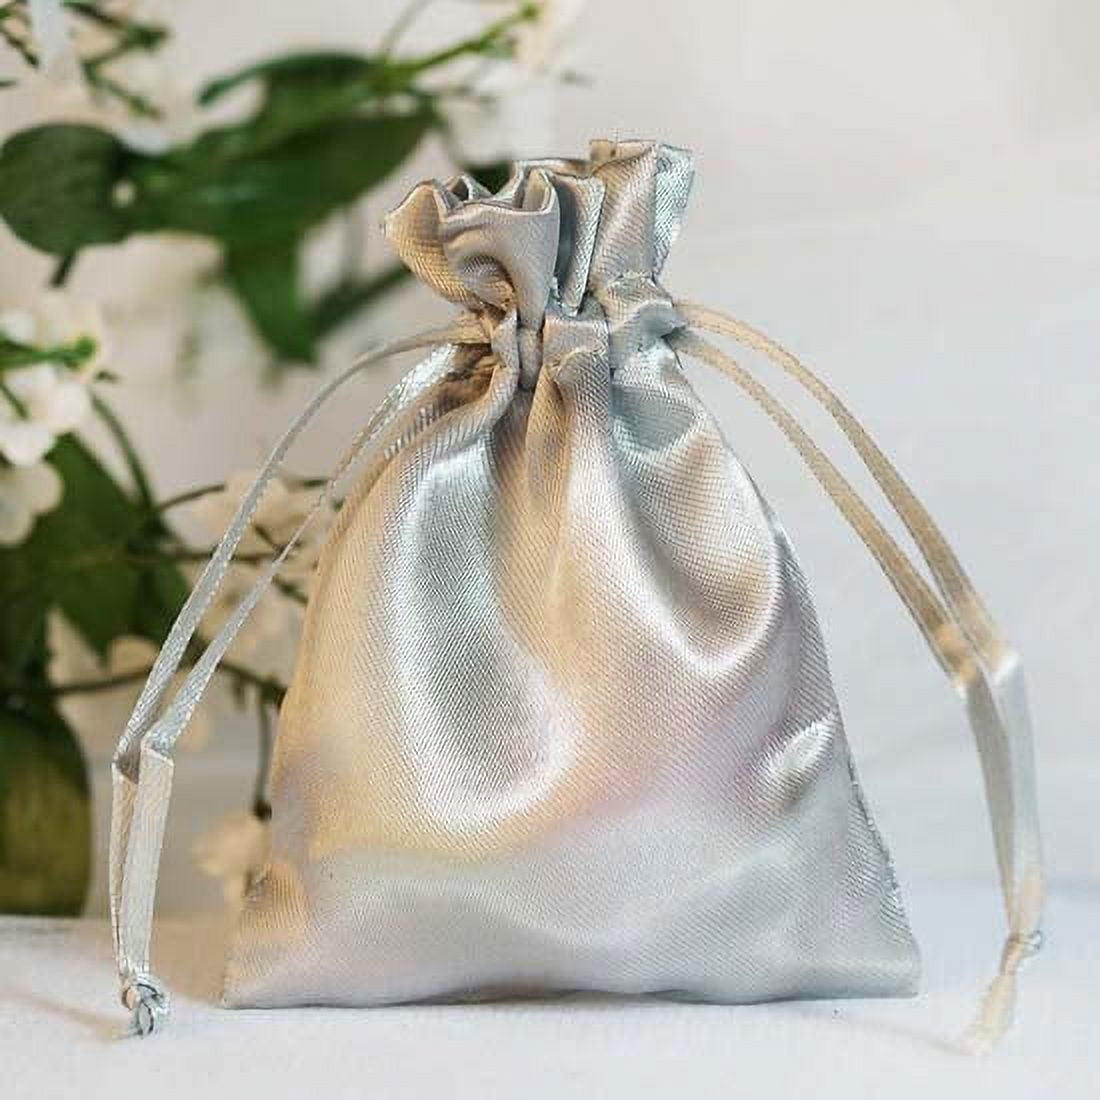 Knitial 4 x 6 Satin Gold Gift Bags, Jewelry Bags, Wedding Favor Drawstring Bags Baby Shower Christmas Gift Bags 50 per Pack